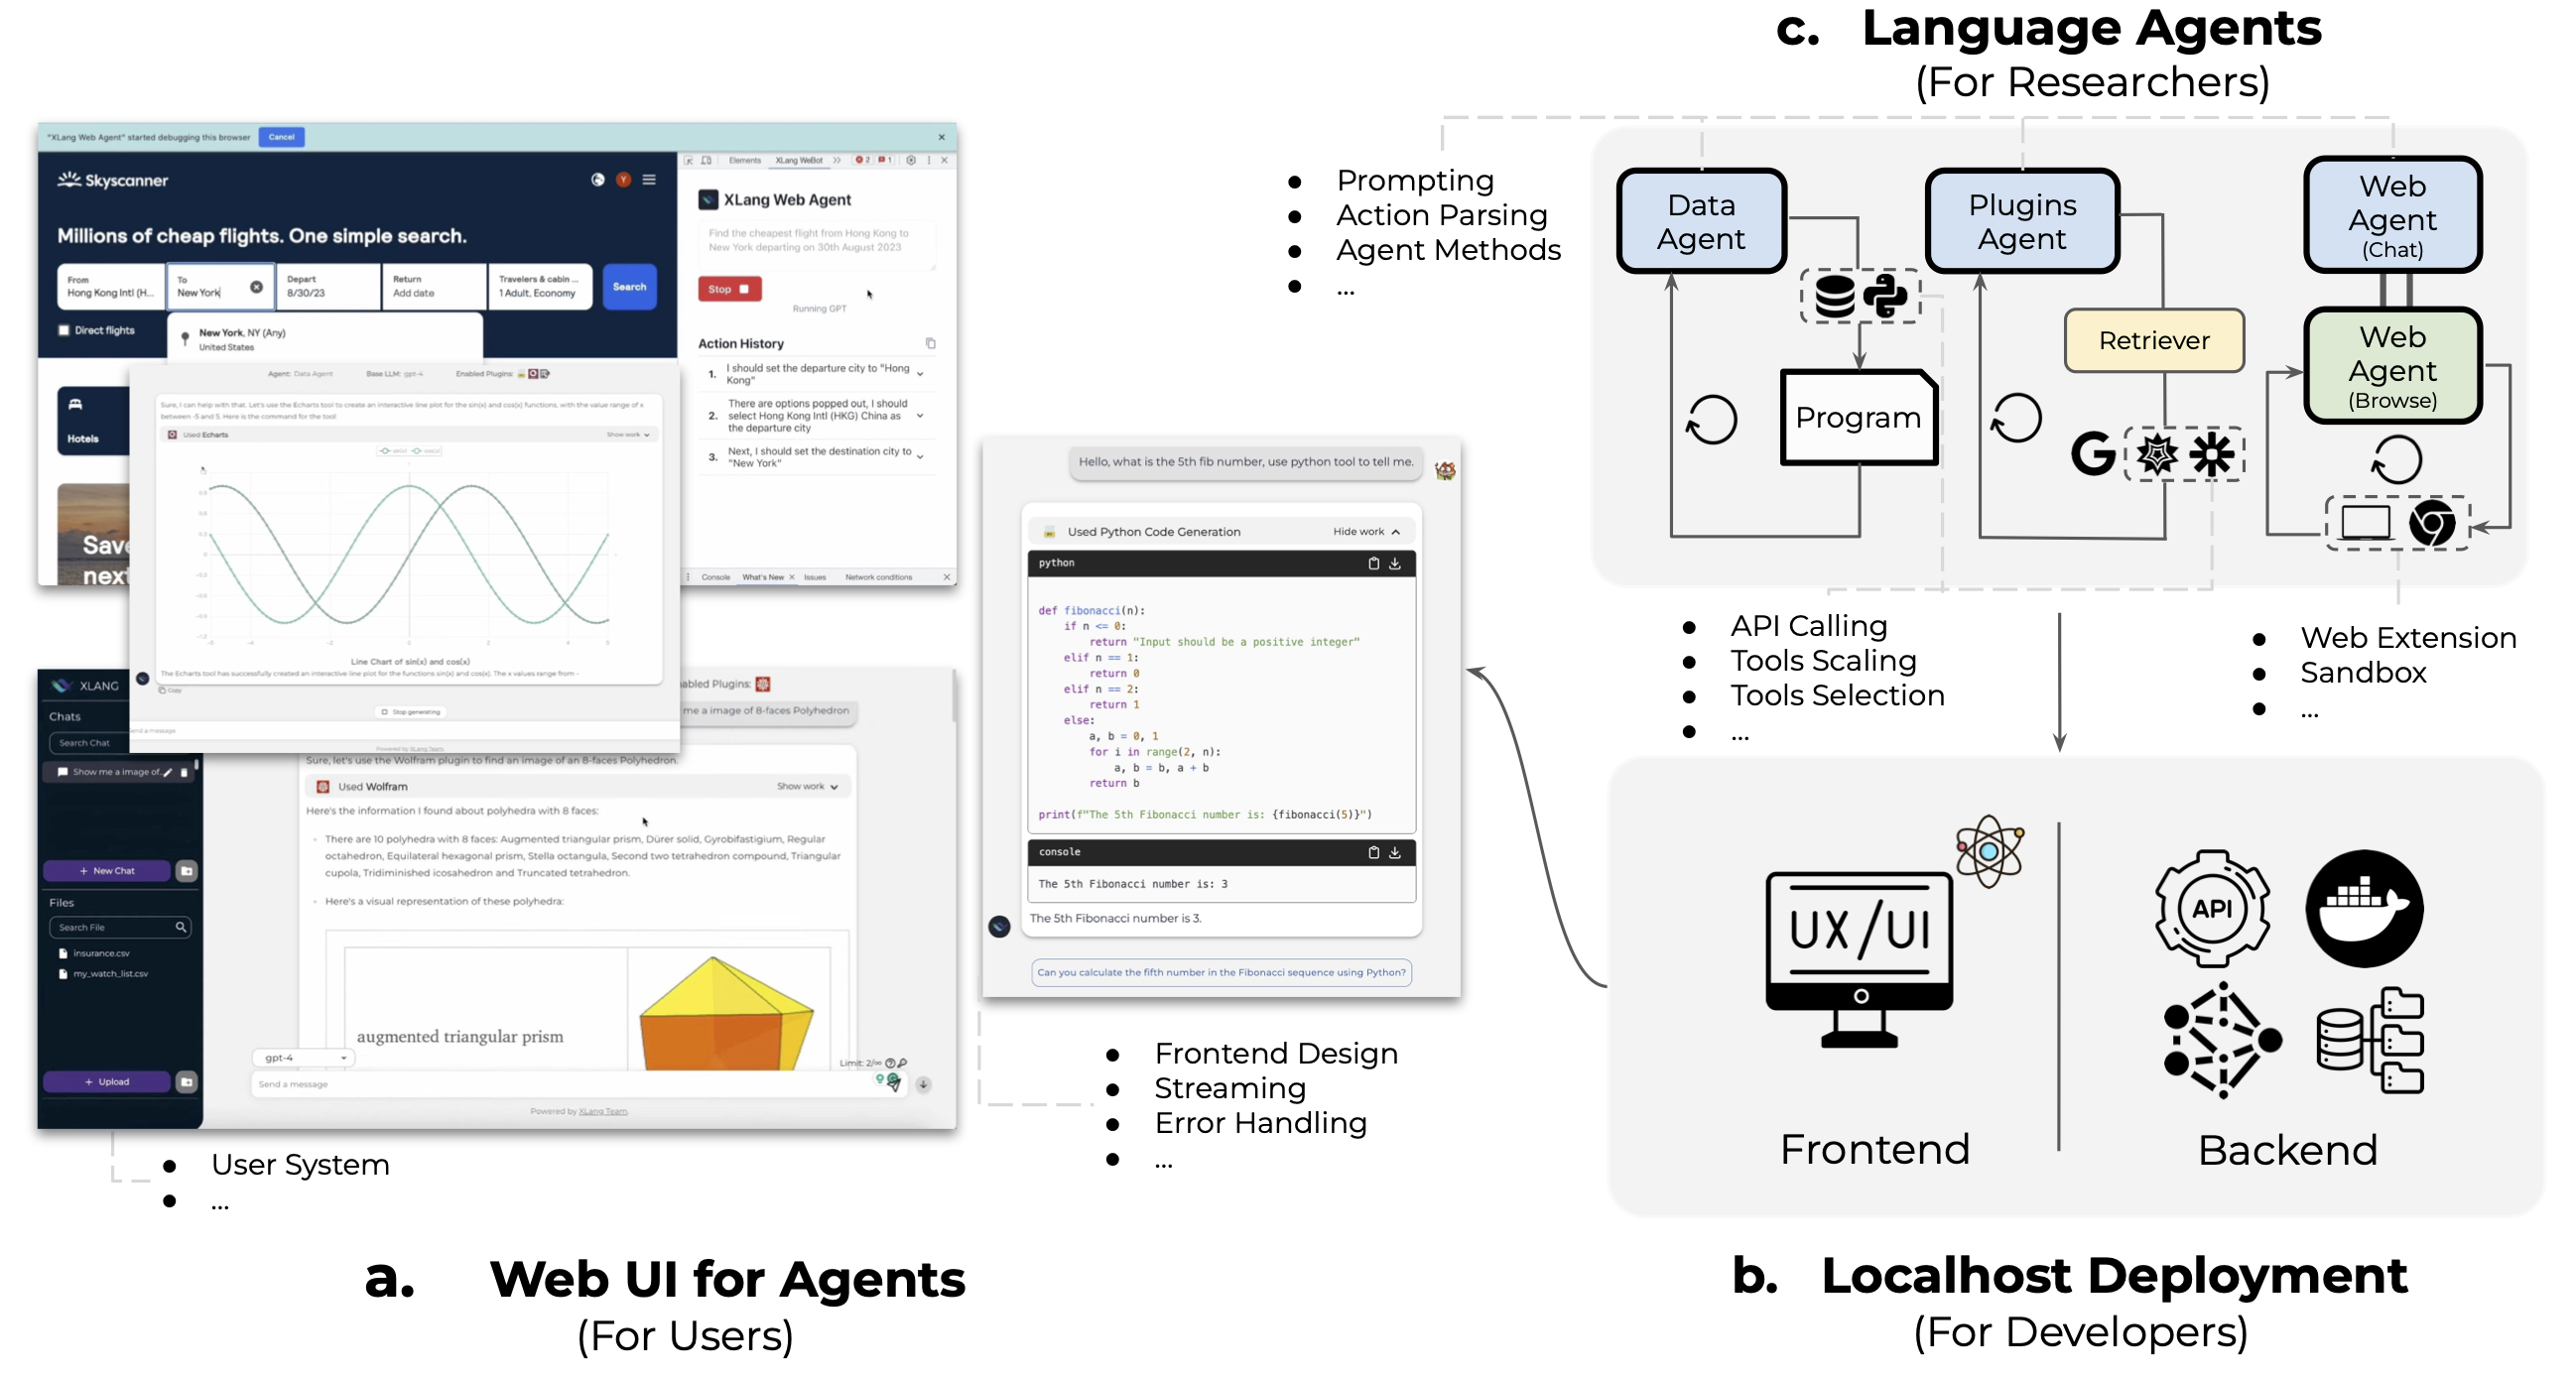 OpenAgents: An Open Platform for Language Agents in the Wild